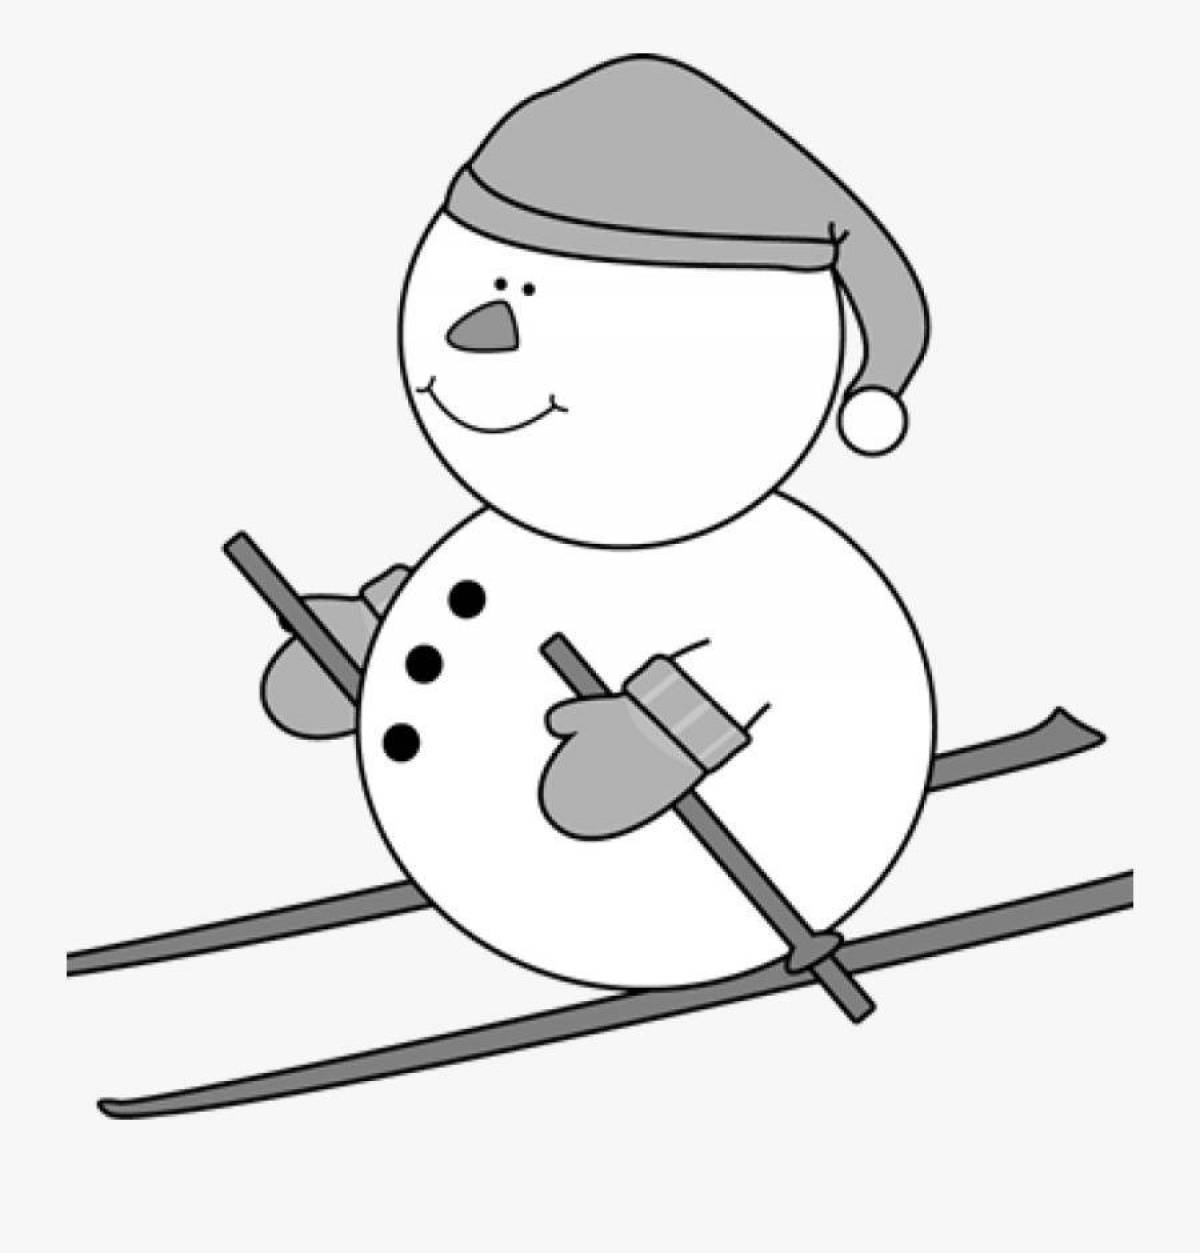 Adorable snowman skiing coloring page